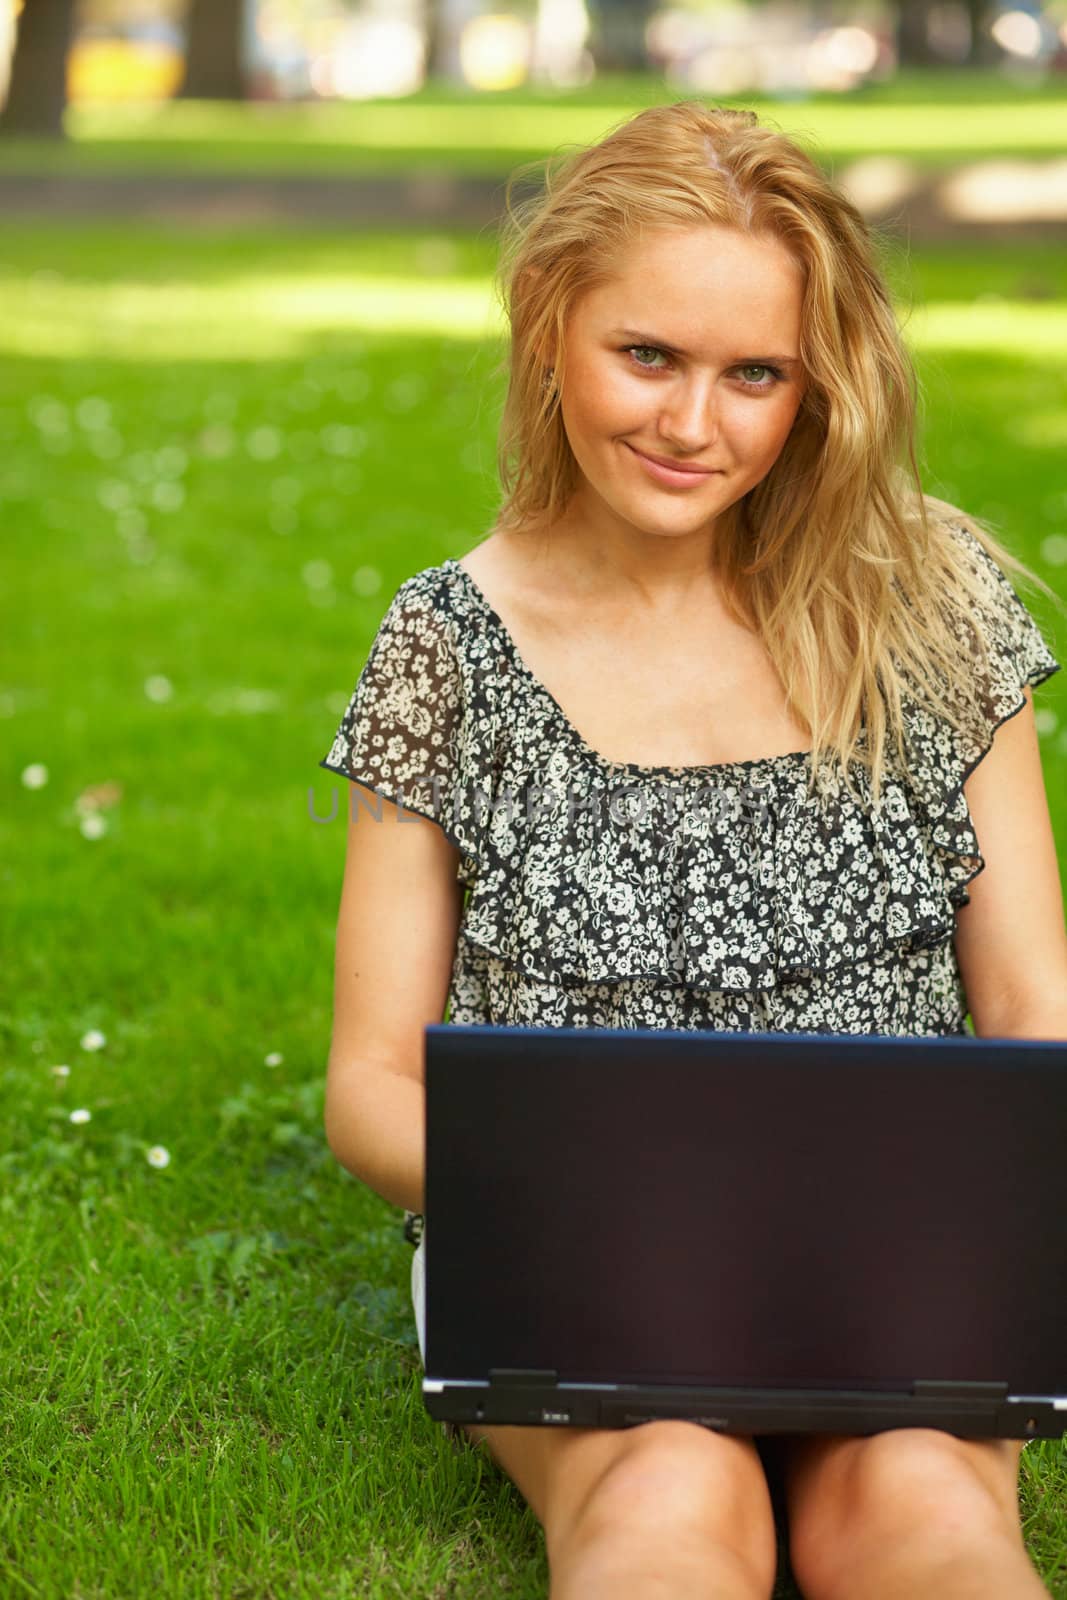 Young woman using her laptop outdoors.